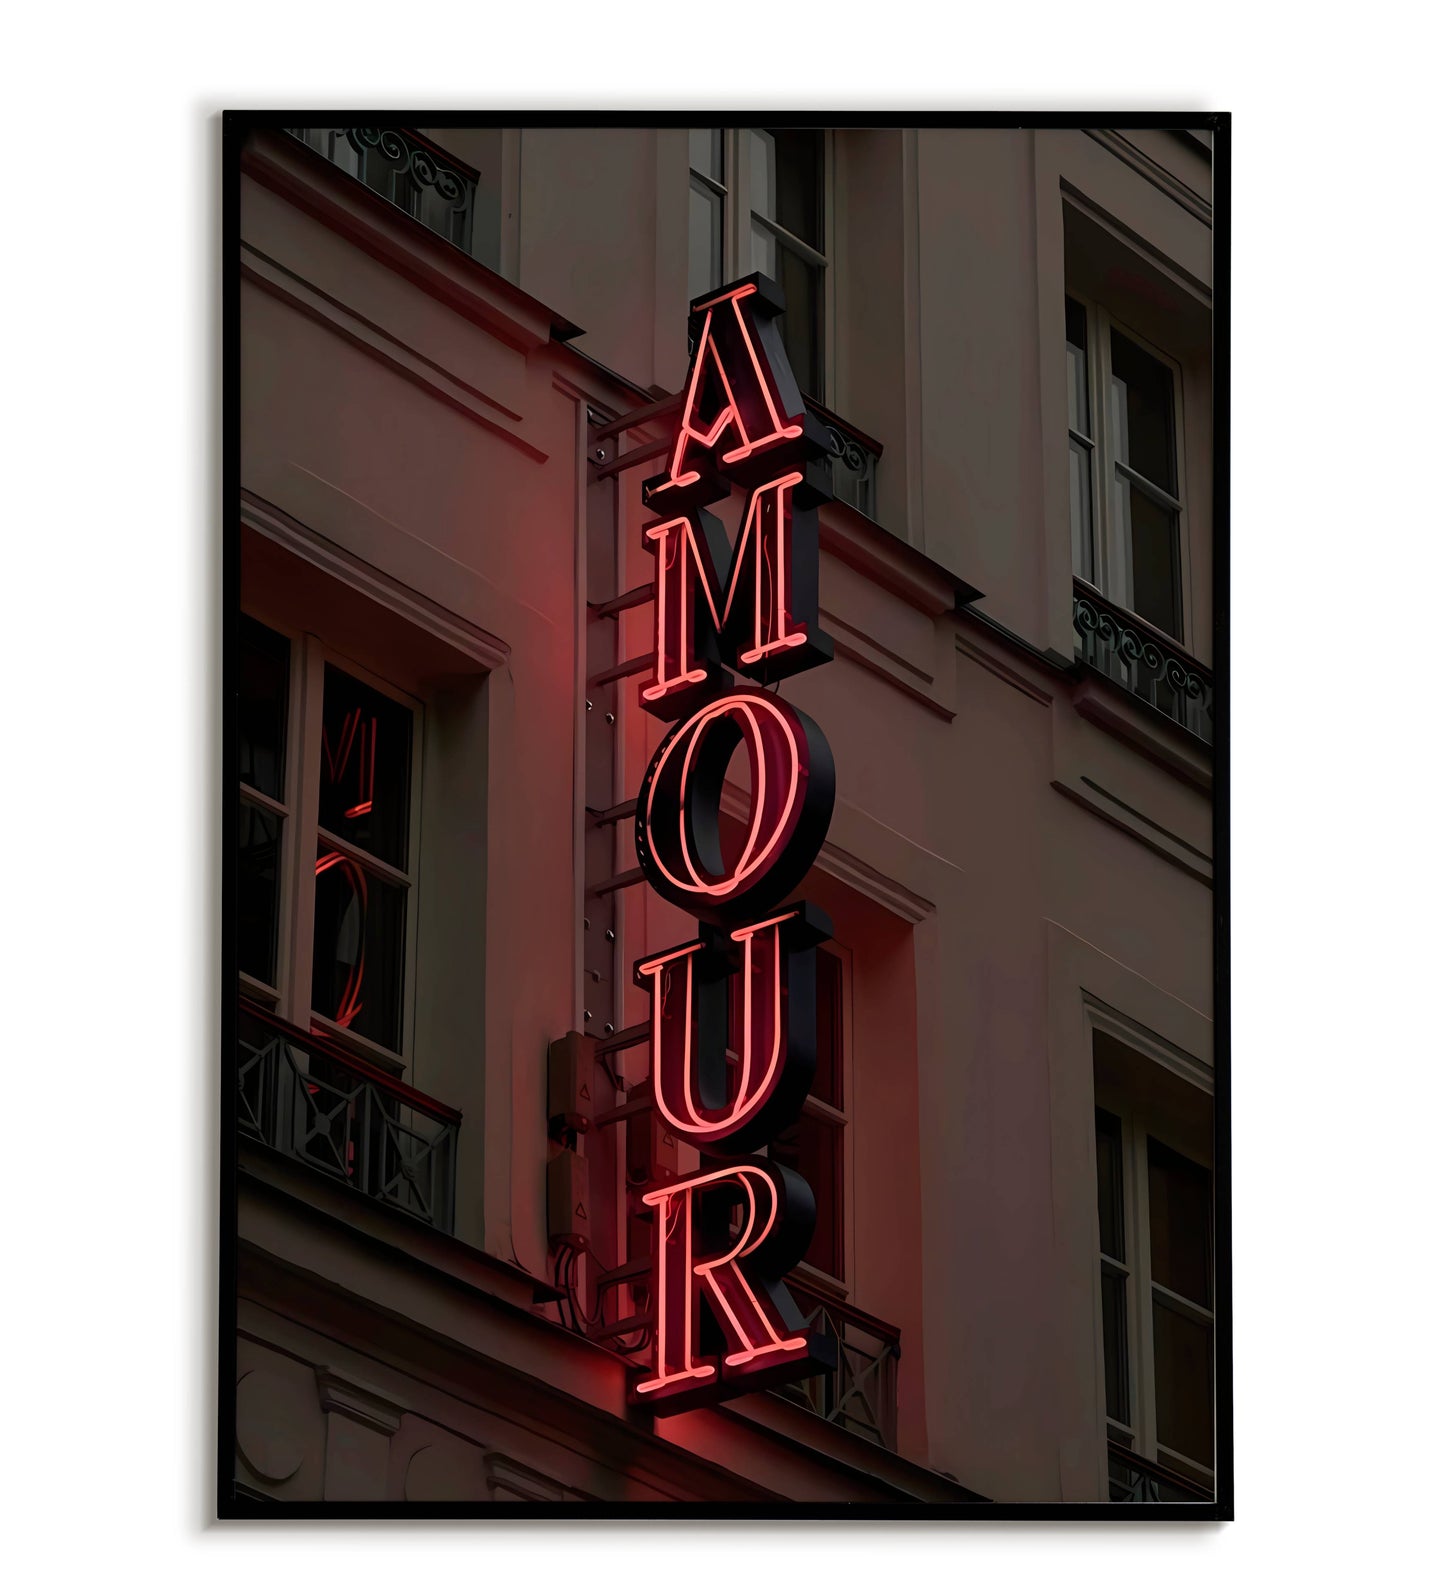 Amour (Love) poster. Simple yet powerful word in French.